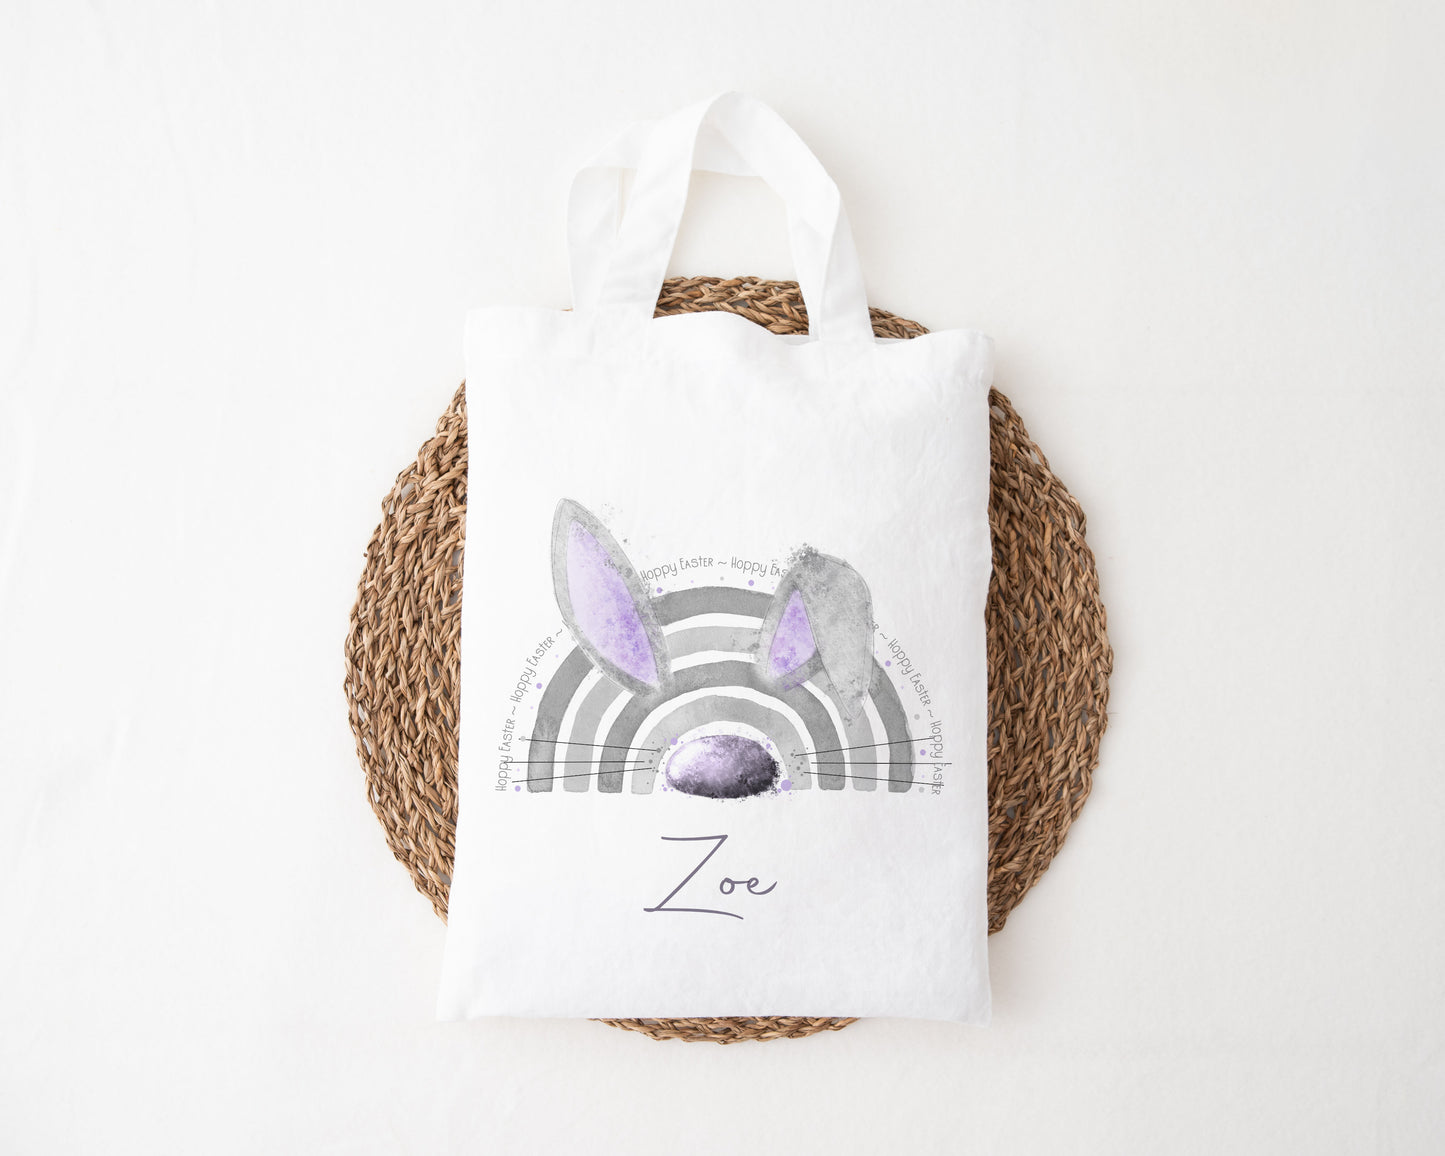 A mini tote bag featuring a personalised lilac rainbow bunny ear design.